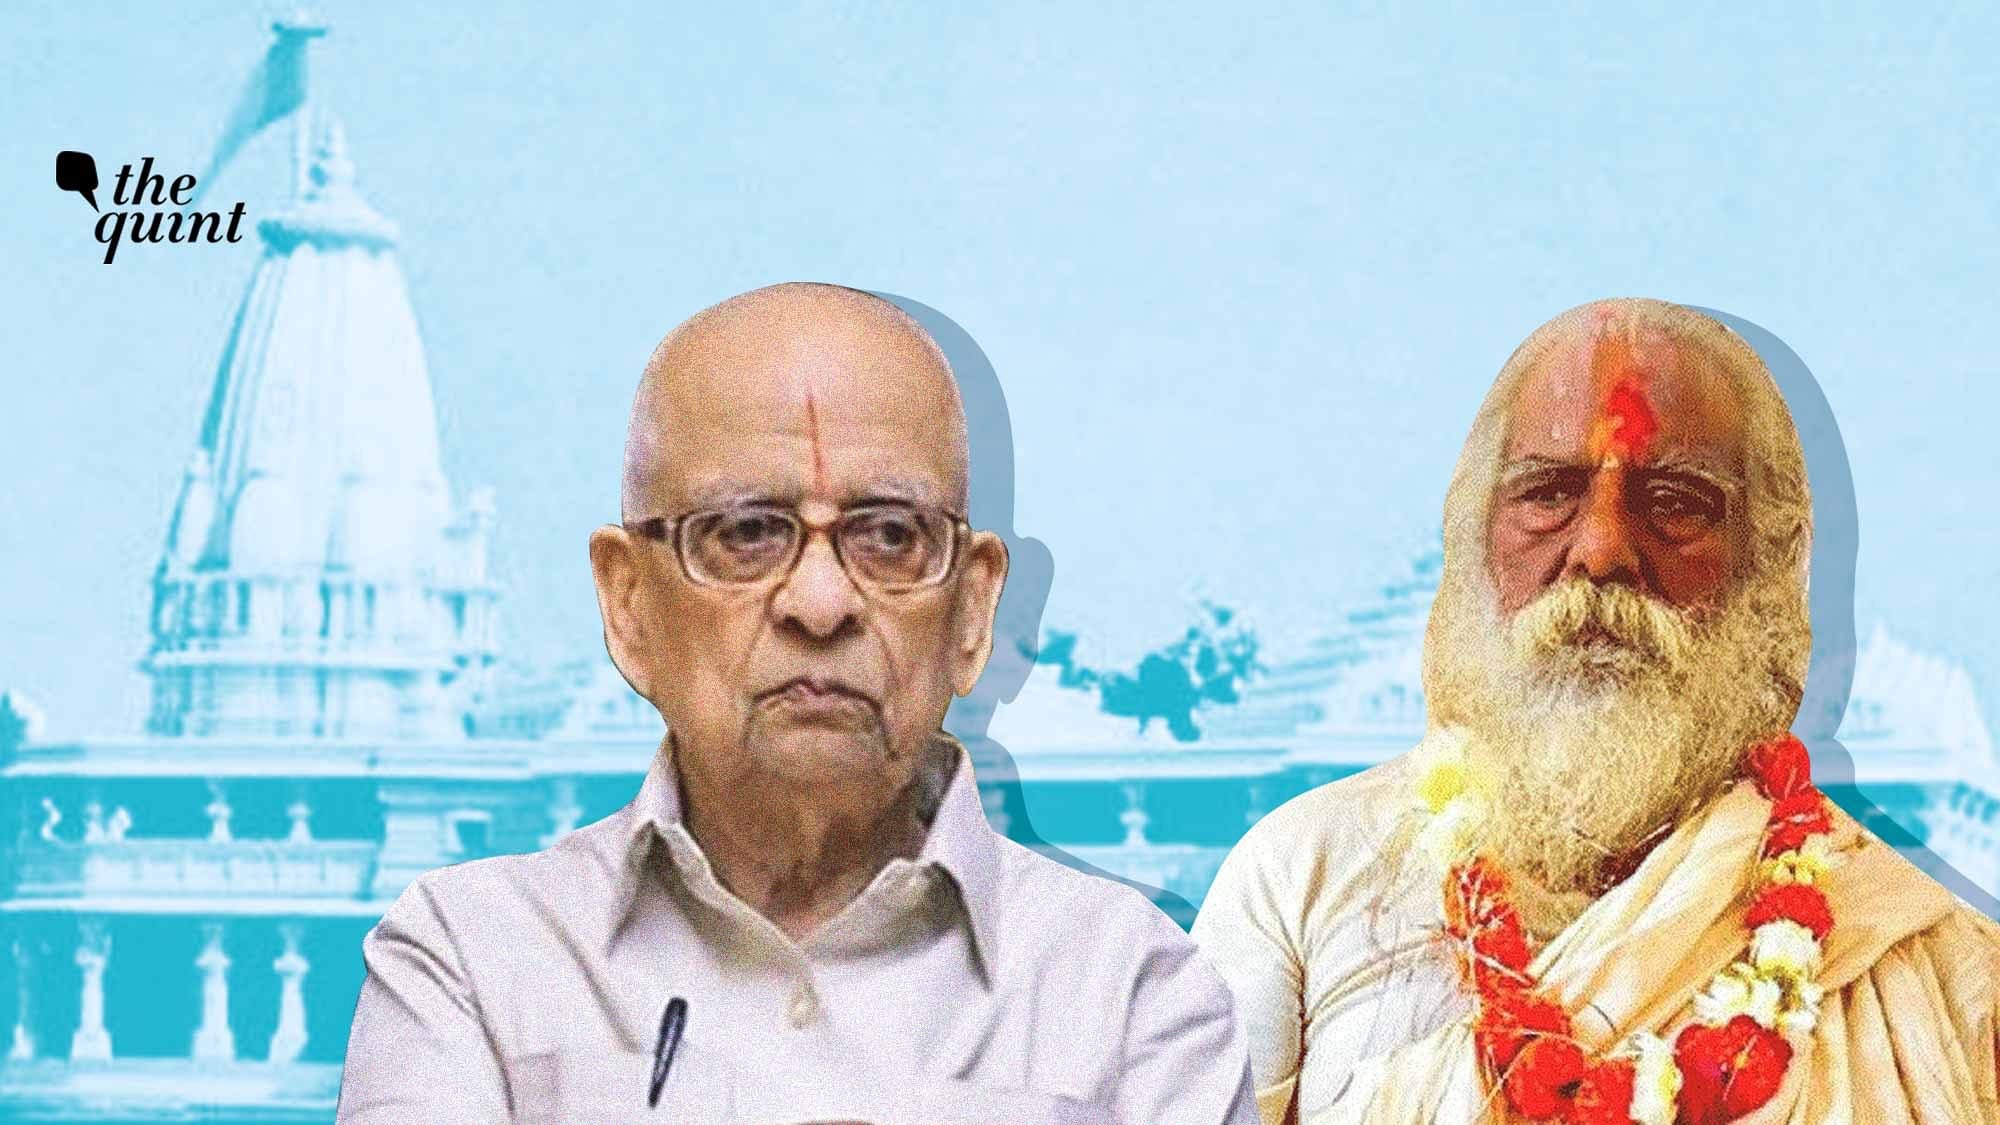 Exclusion of Mahant Nritya Gopal Das, the chief of the Ram Janmabhoomi Nyas, has ruffled feathers within the VHP.